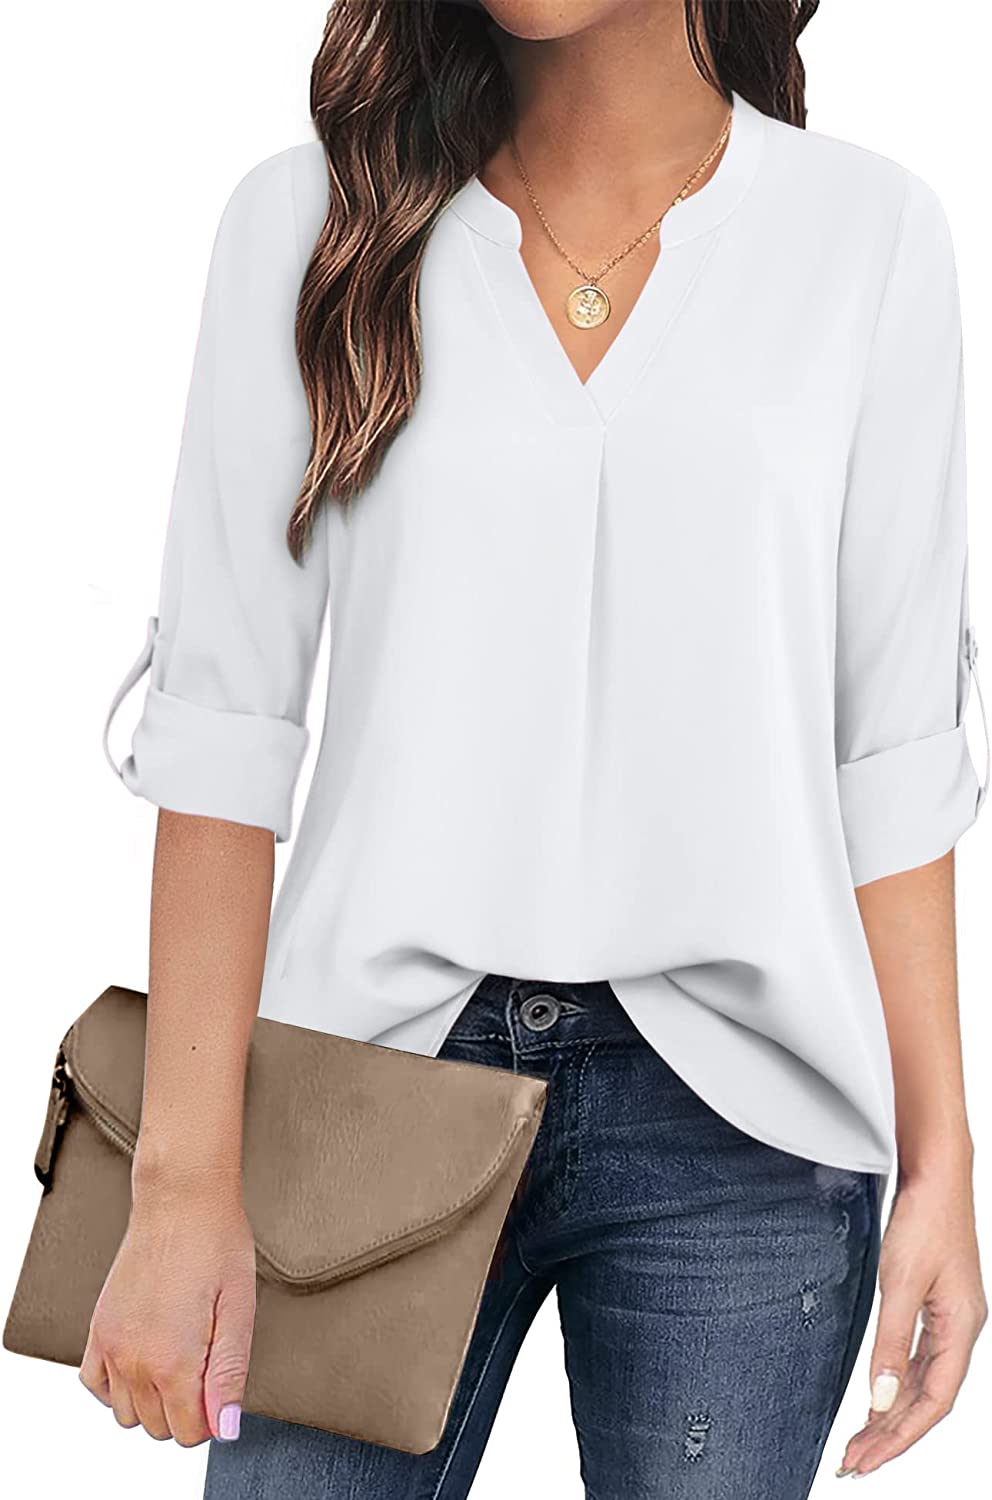 Timeson Blouses for Women,Tunic Tops to Wear with Leggings V Neck